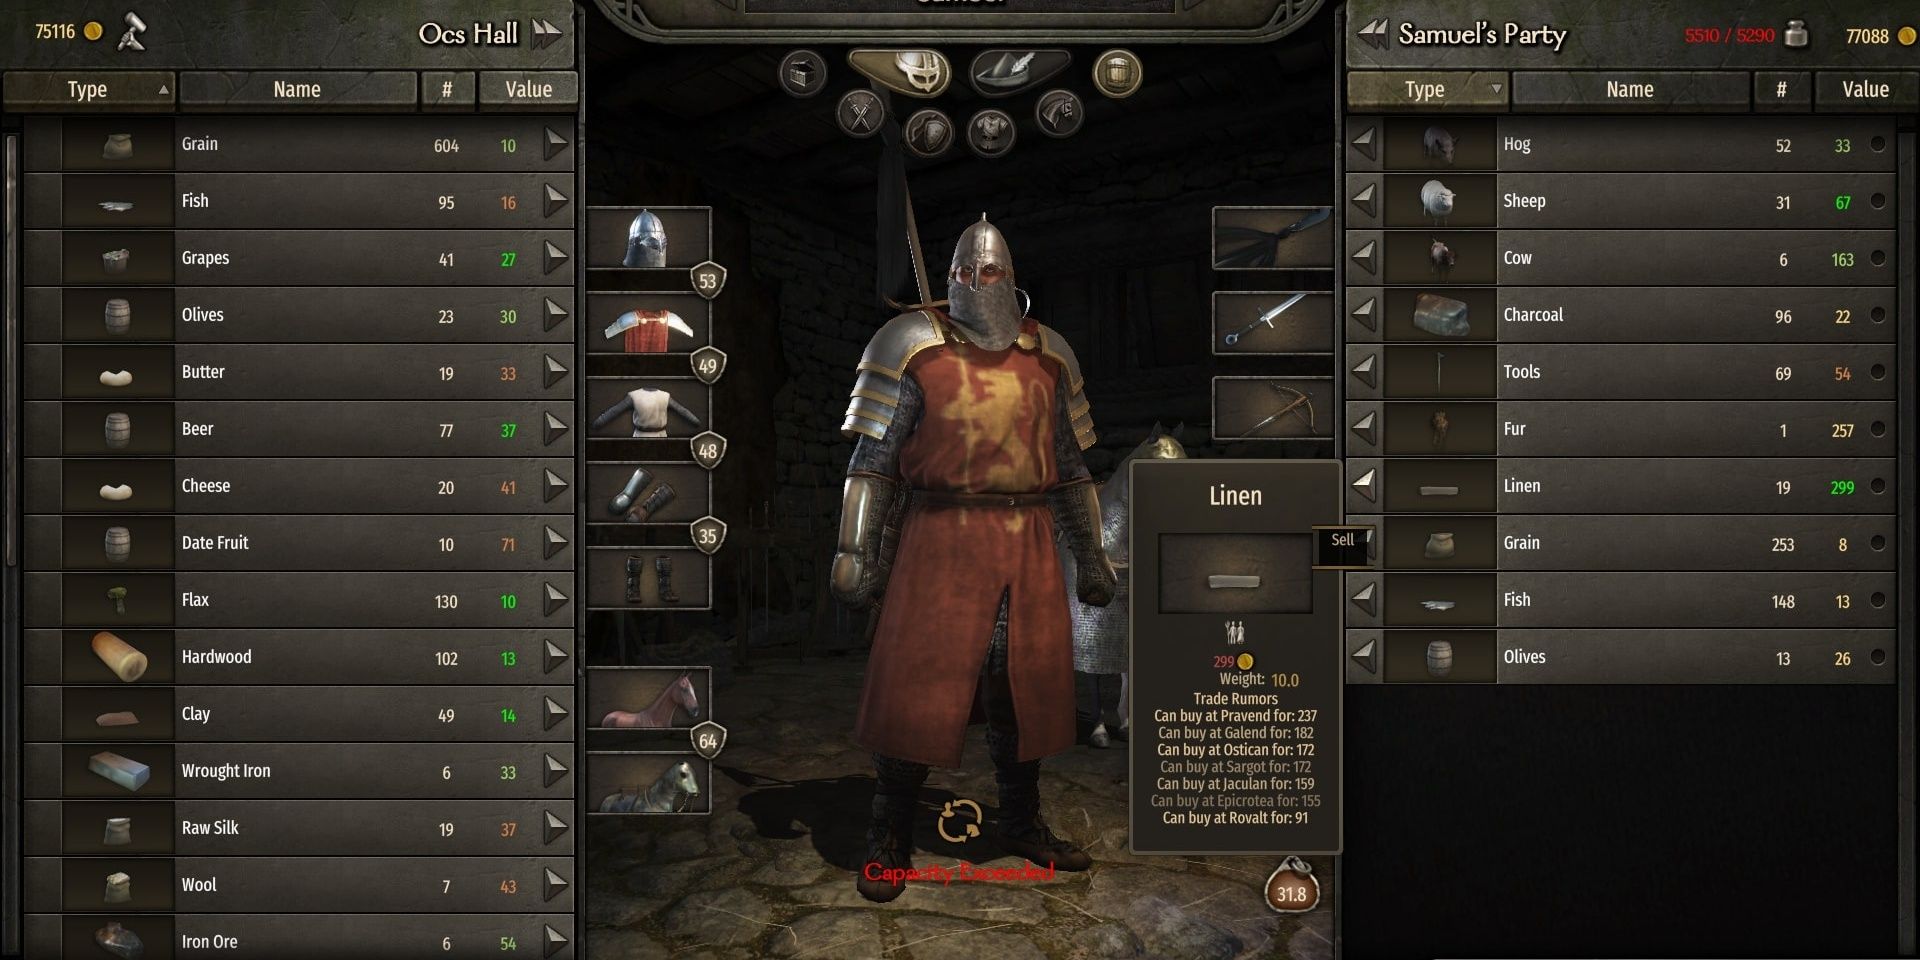 Mount & Blade 2: Bannerlord Trading Goods